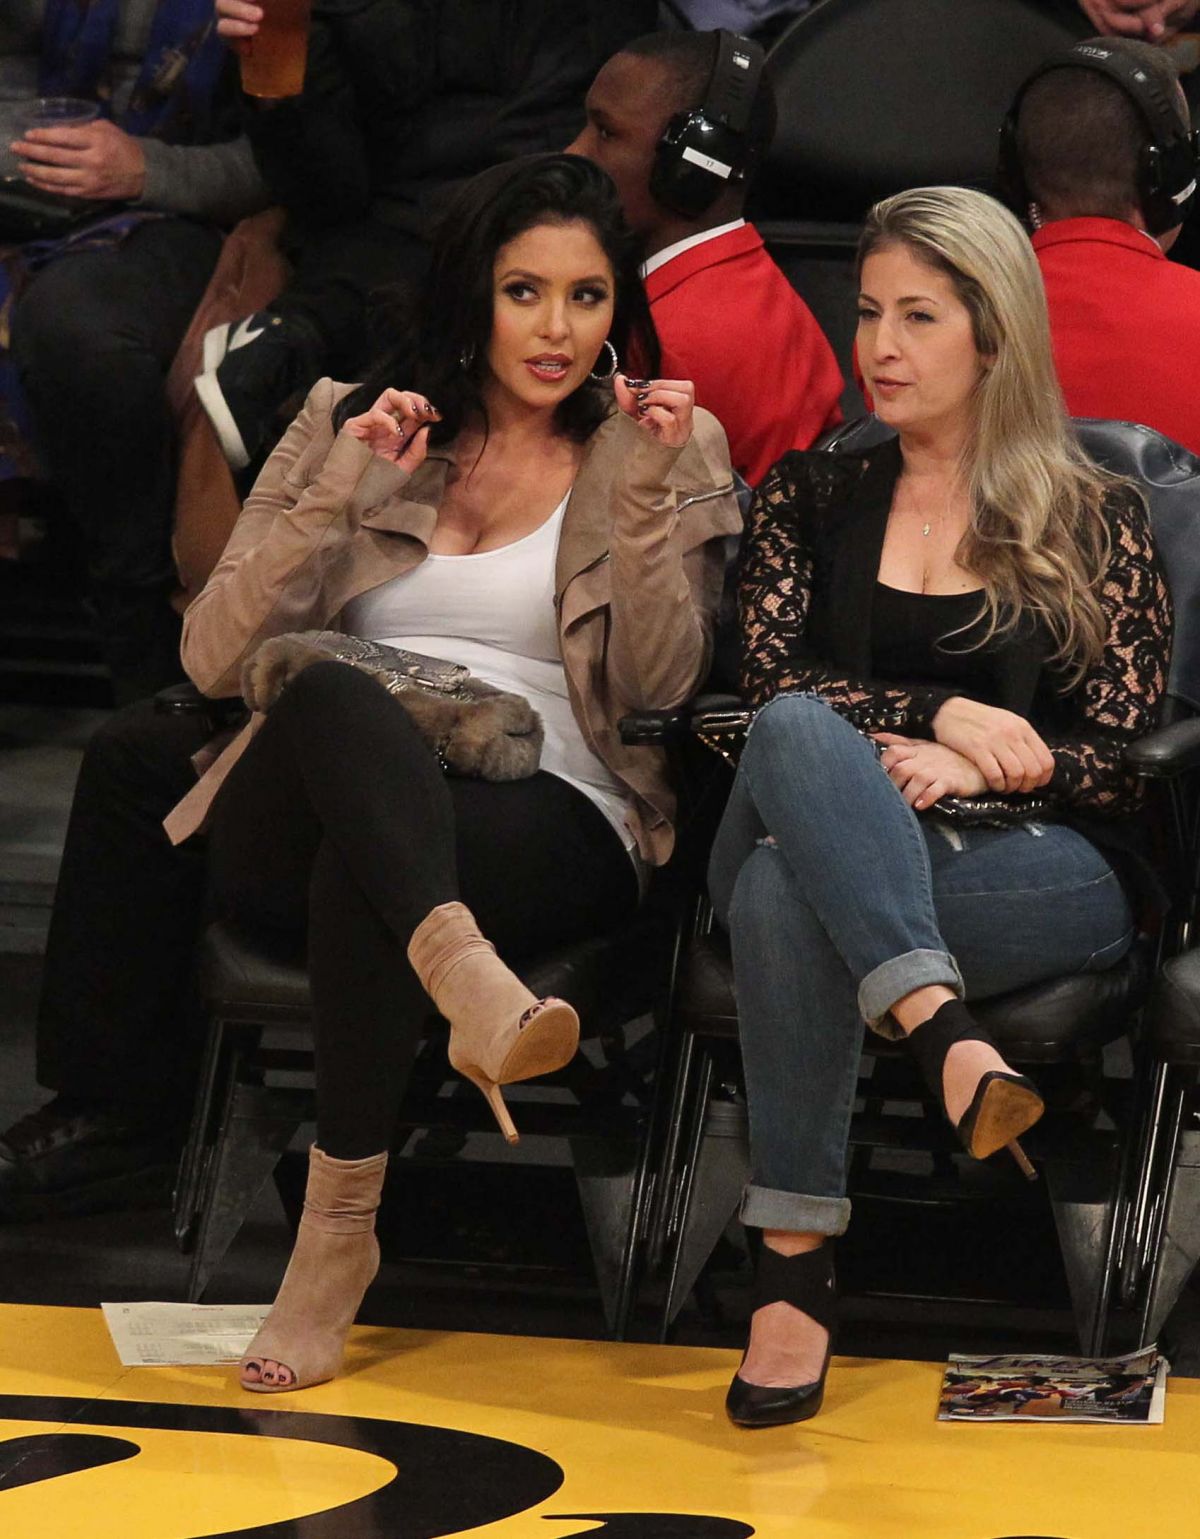 VANESSA BRYANT at a Lakers Game 01/12/2015.